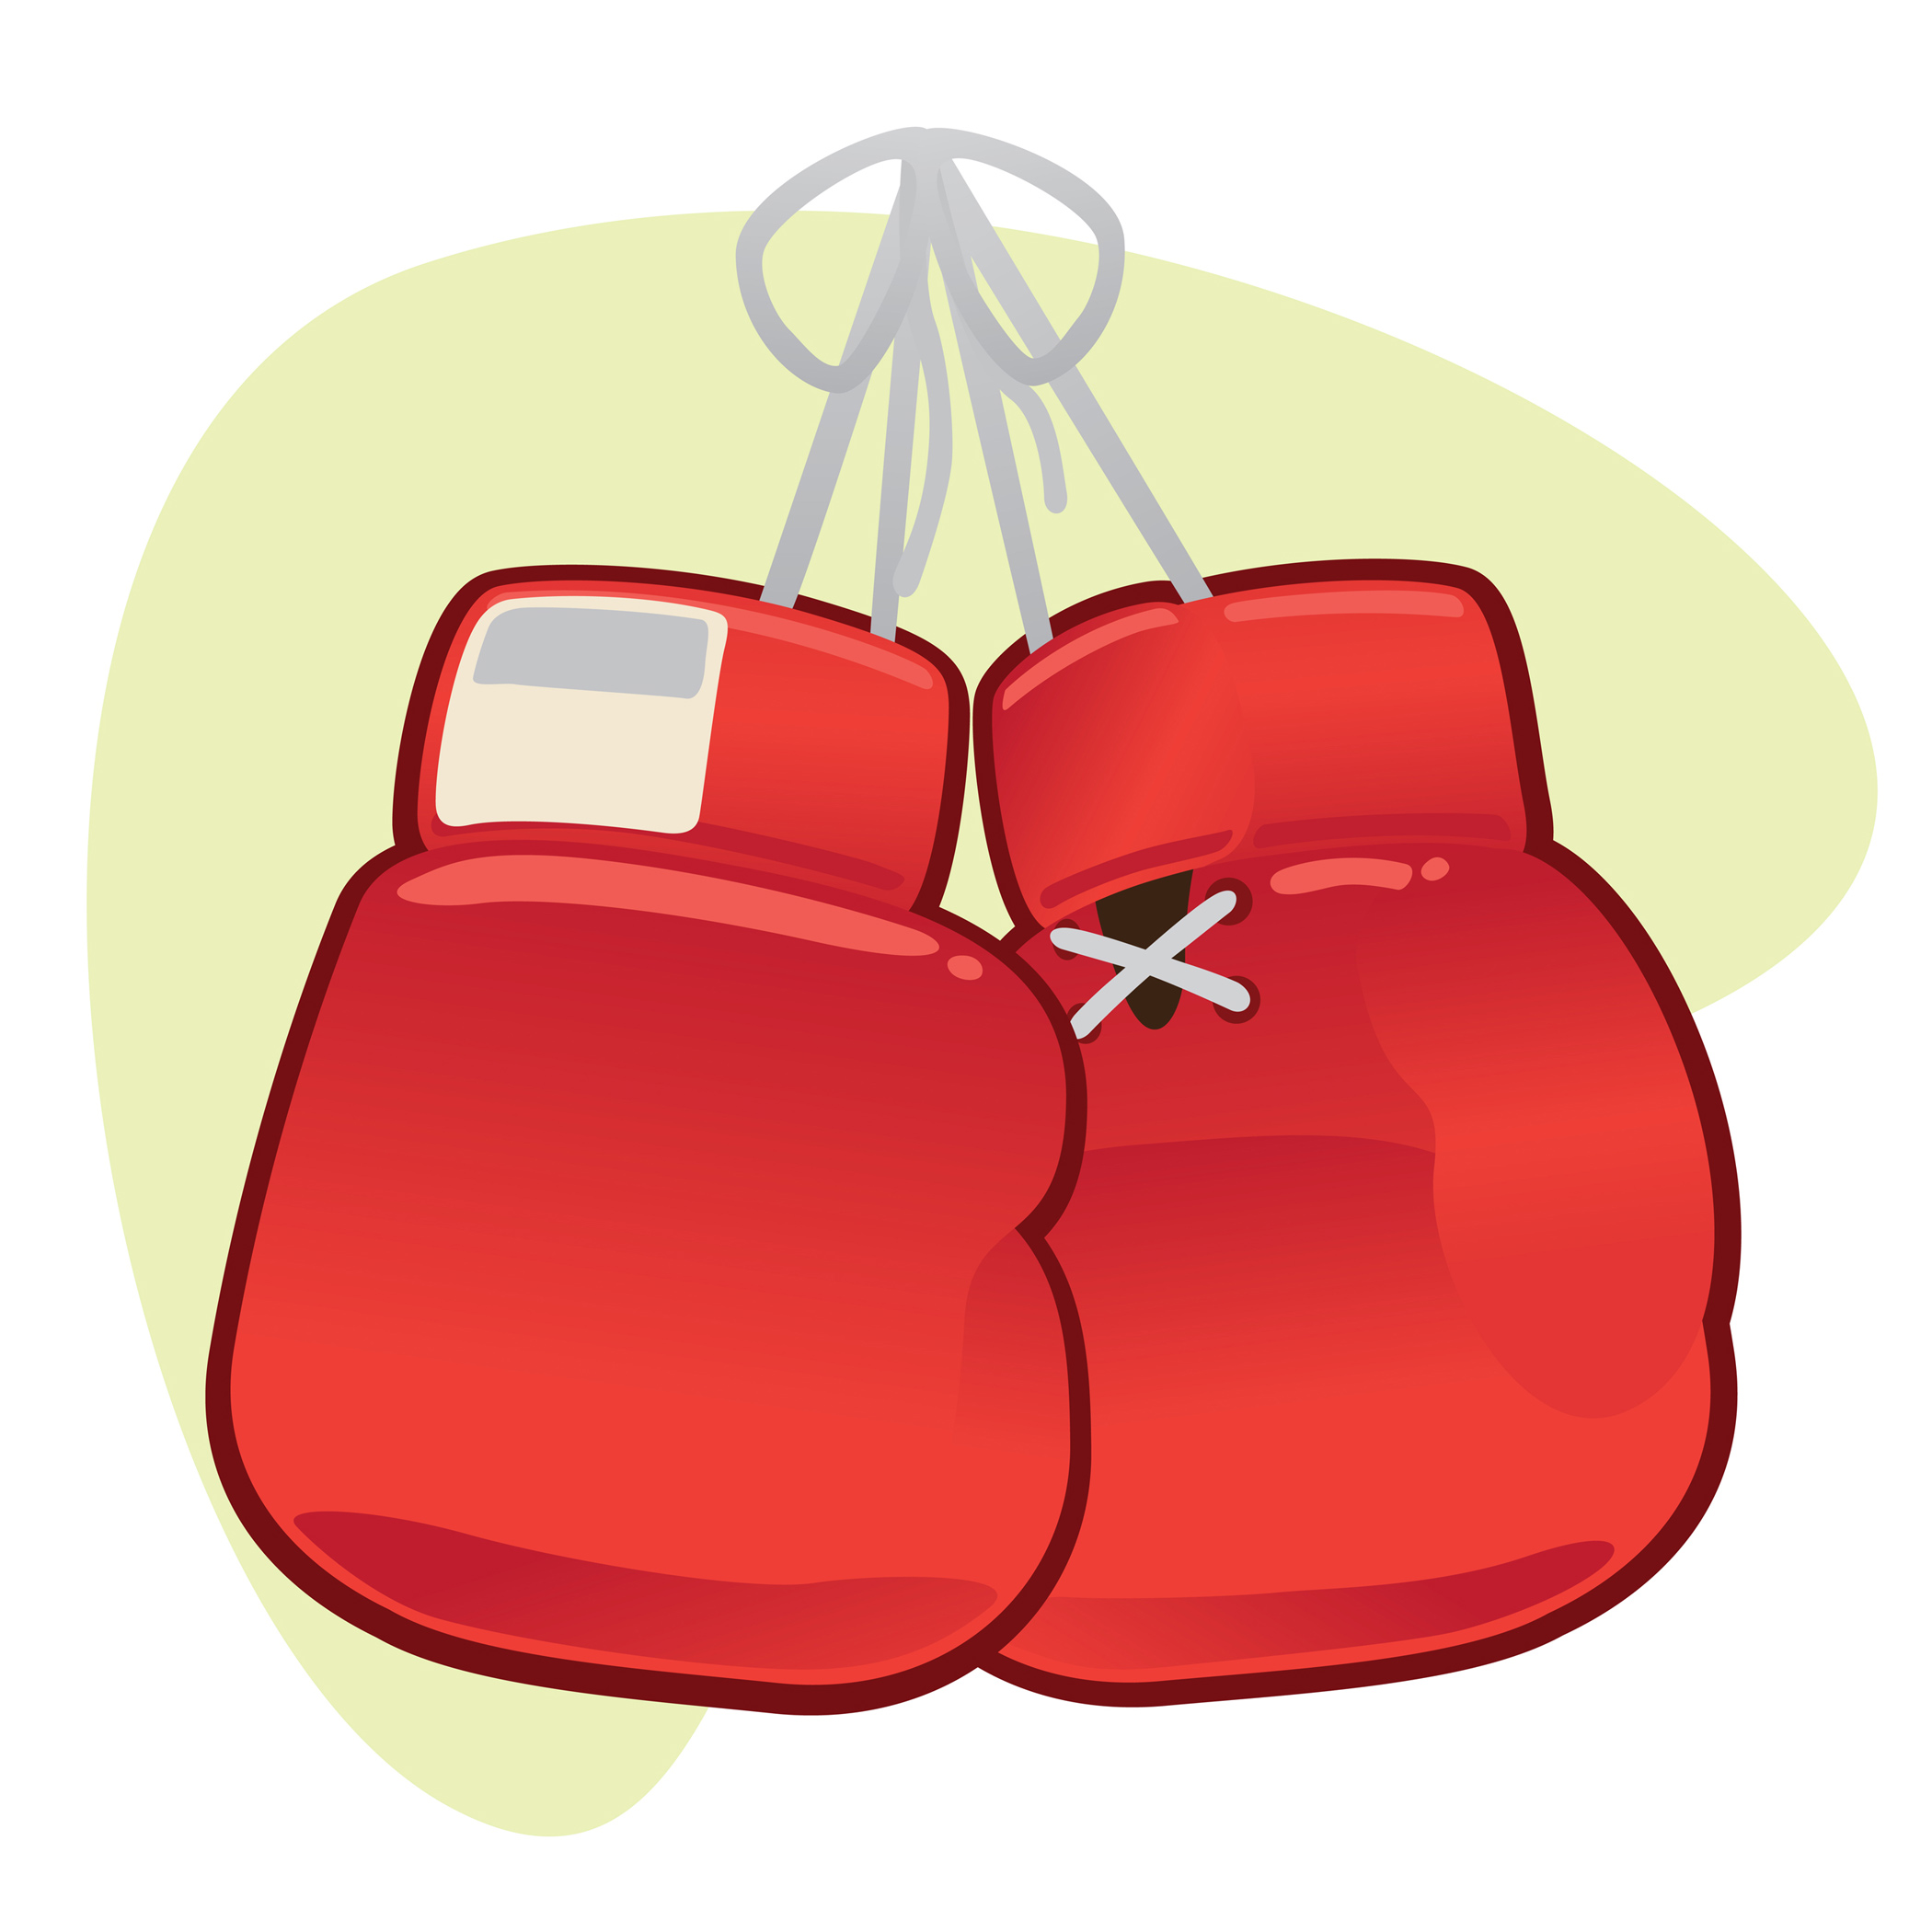 Boxing Glove Images - Clipart .